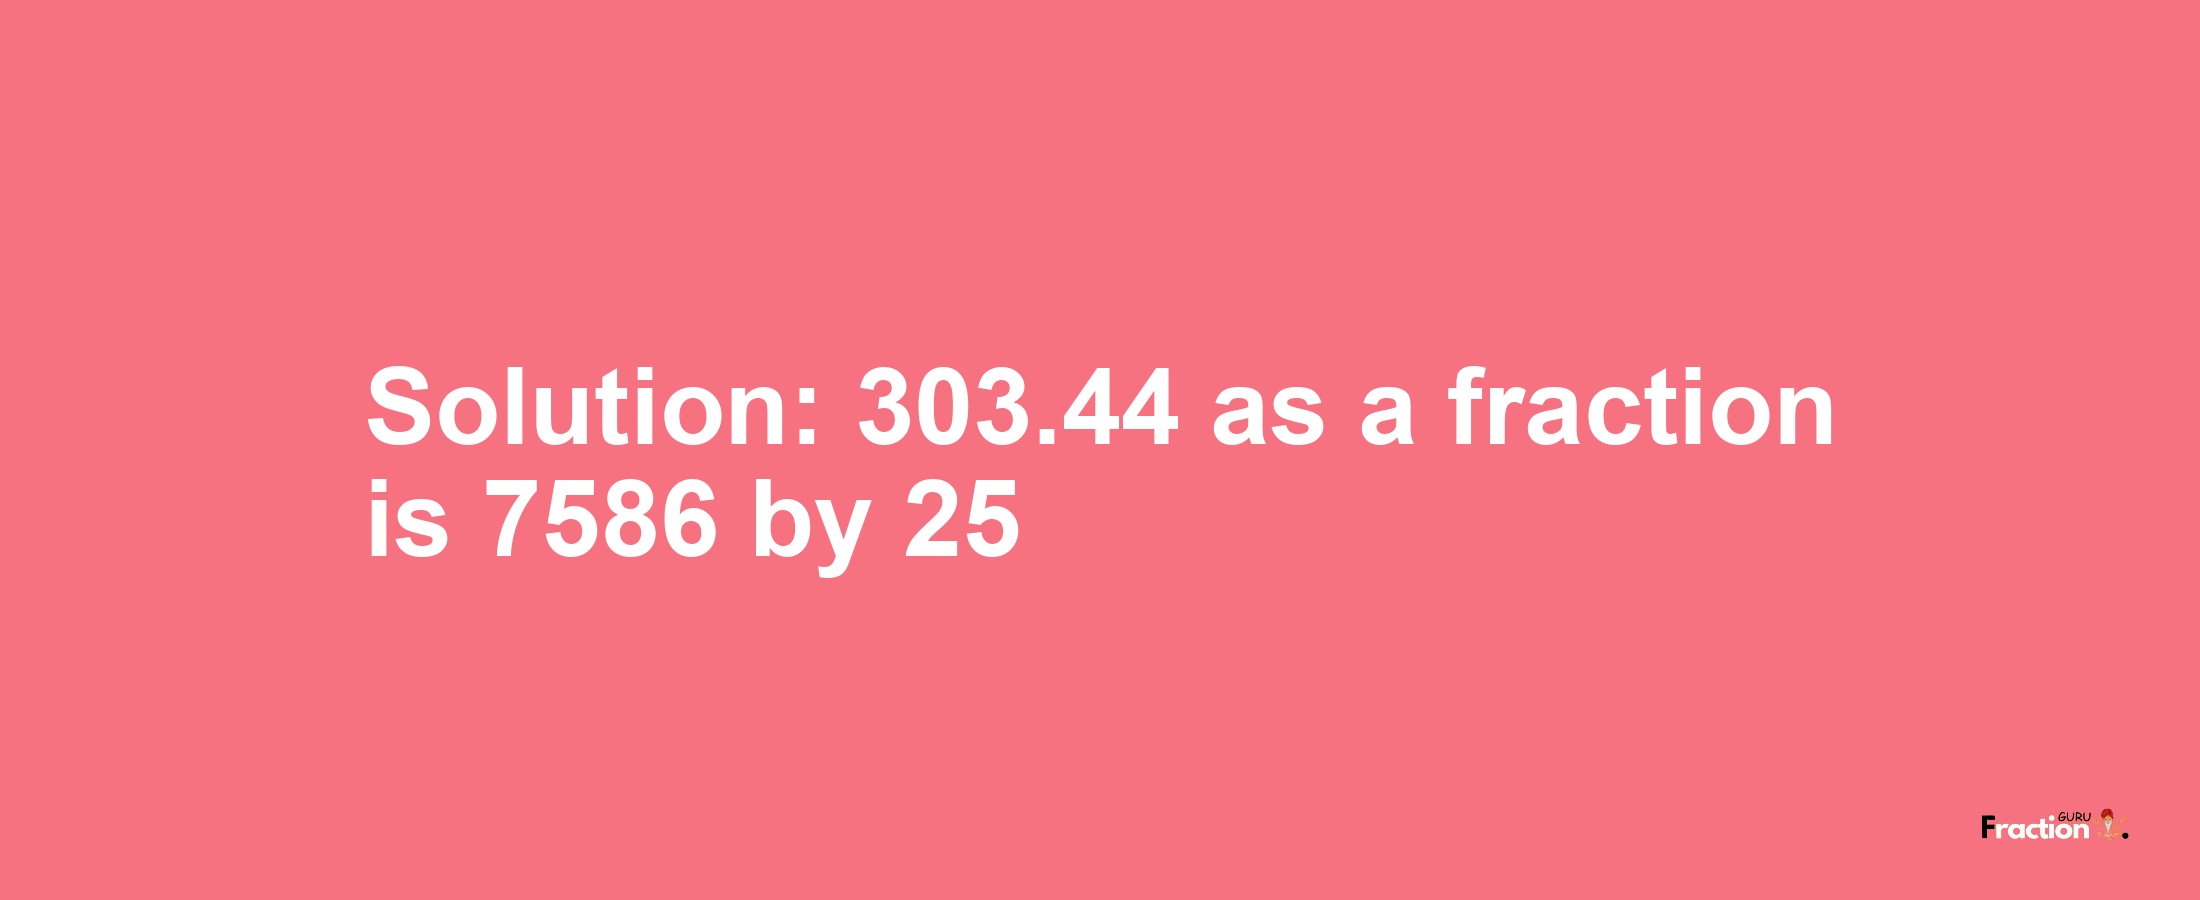 Solution:303.44 as a fraction is 7586/25